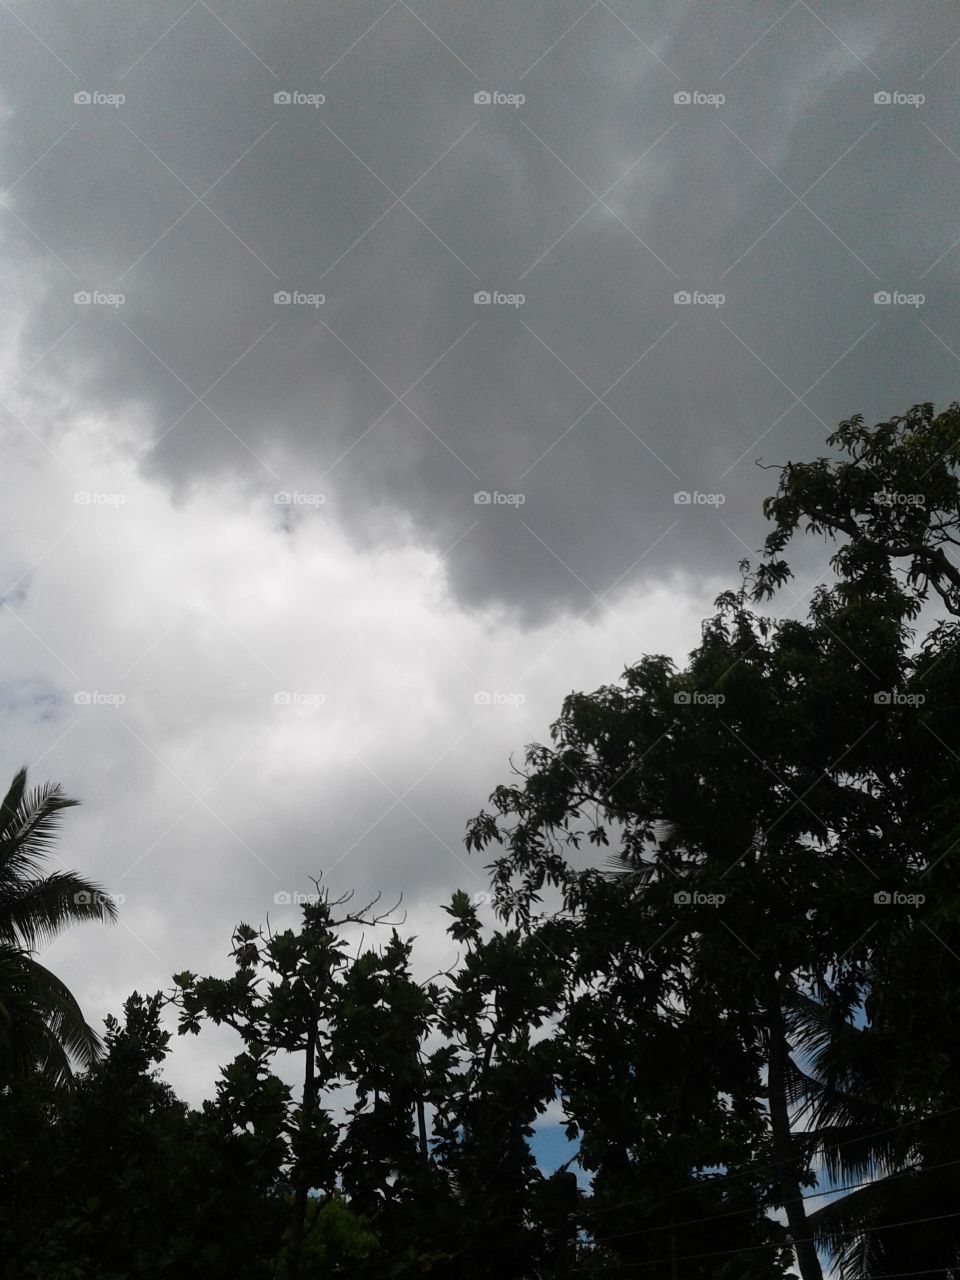 rain is to be.darken clouds on the sky.also white and blu sky hiding with it.